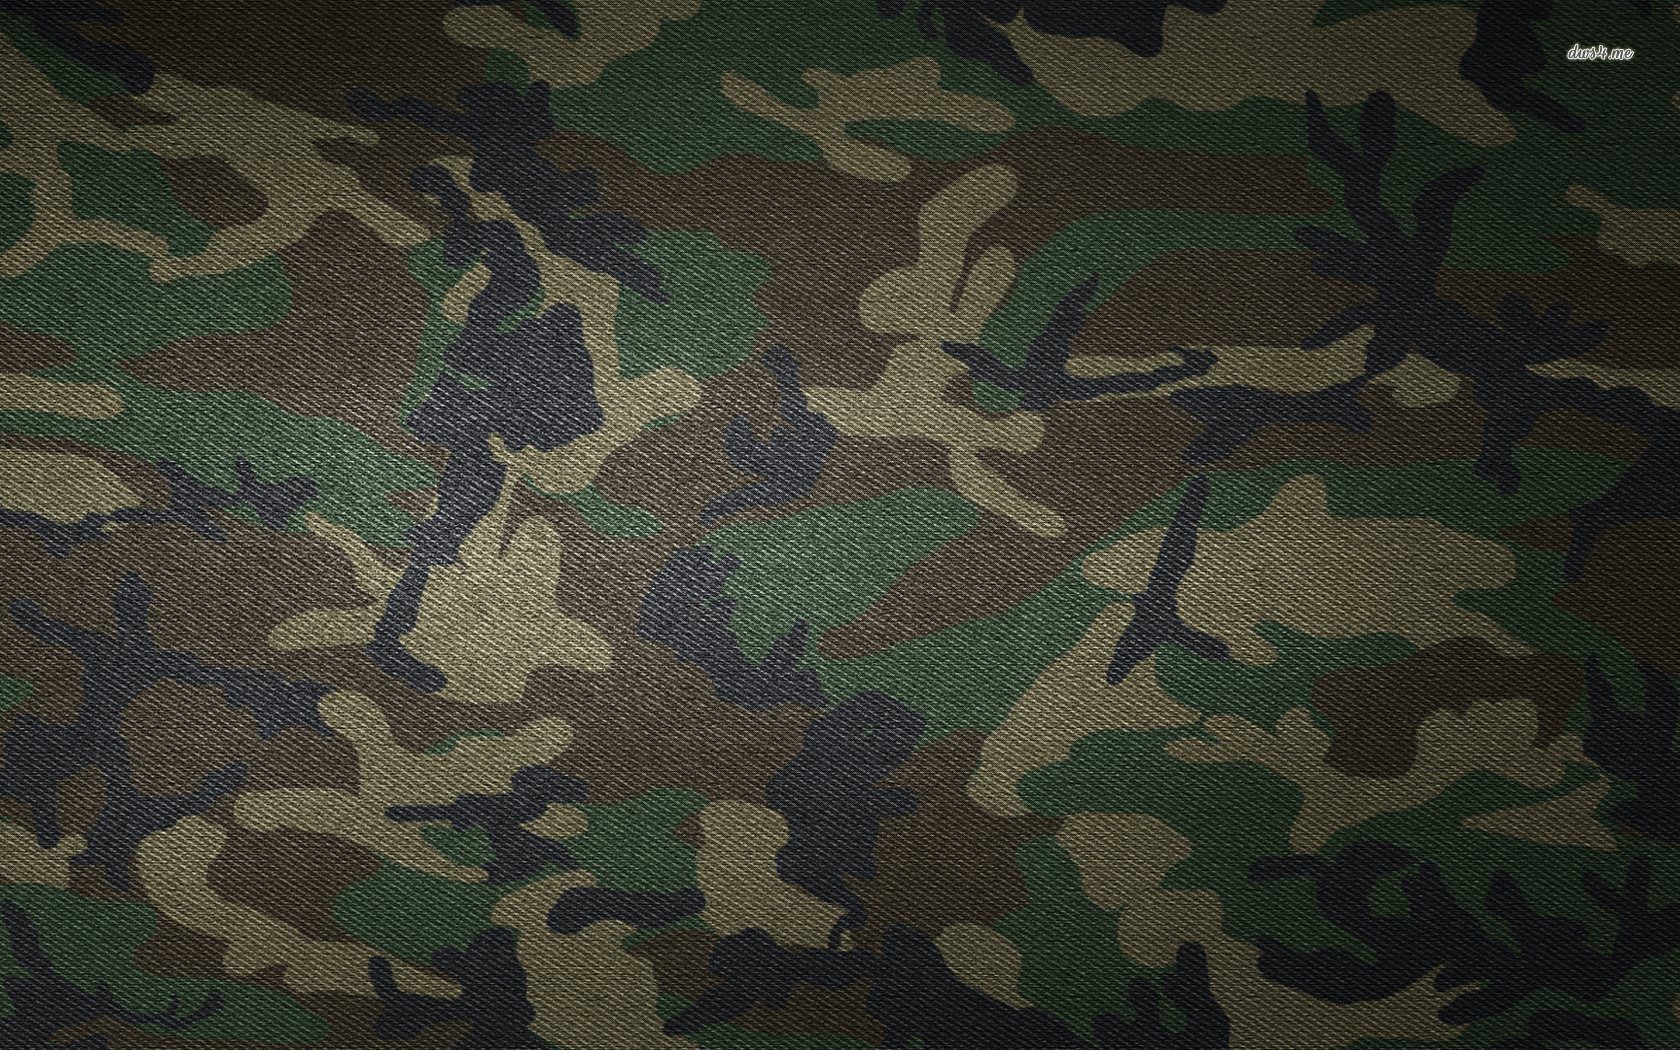 digital camo wallpaper,military camouflage,camouflage,pattern,uniform,clothing